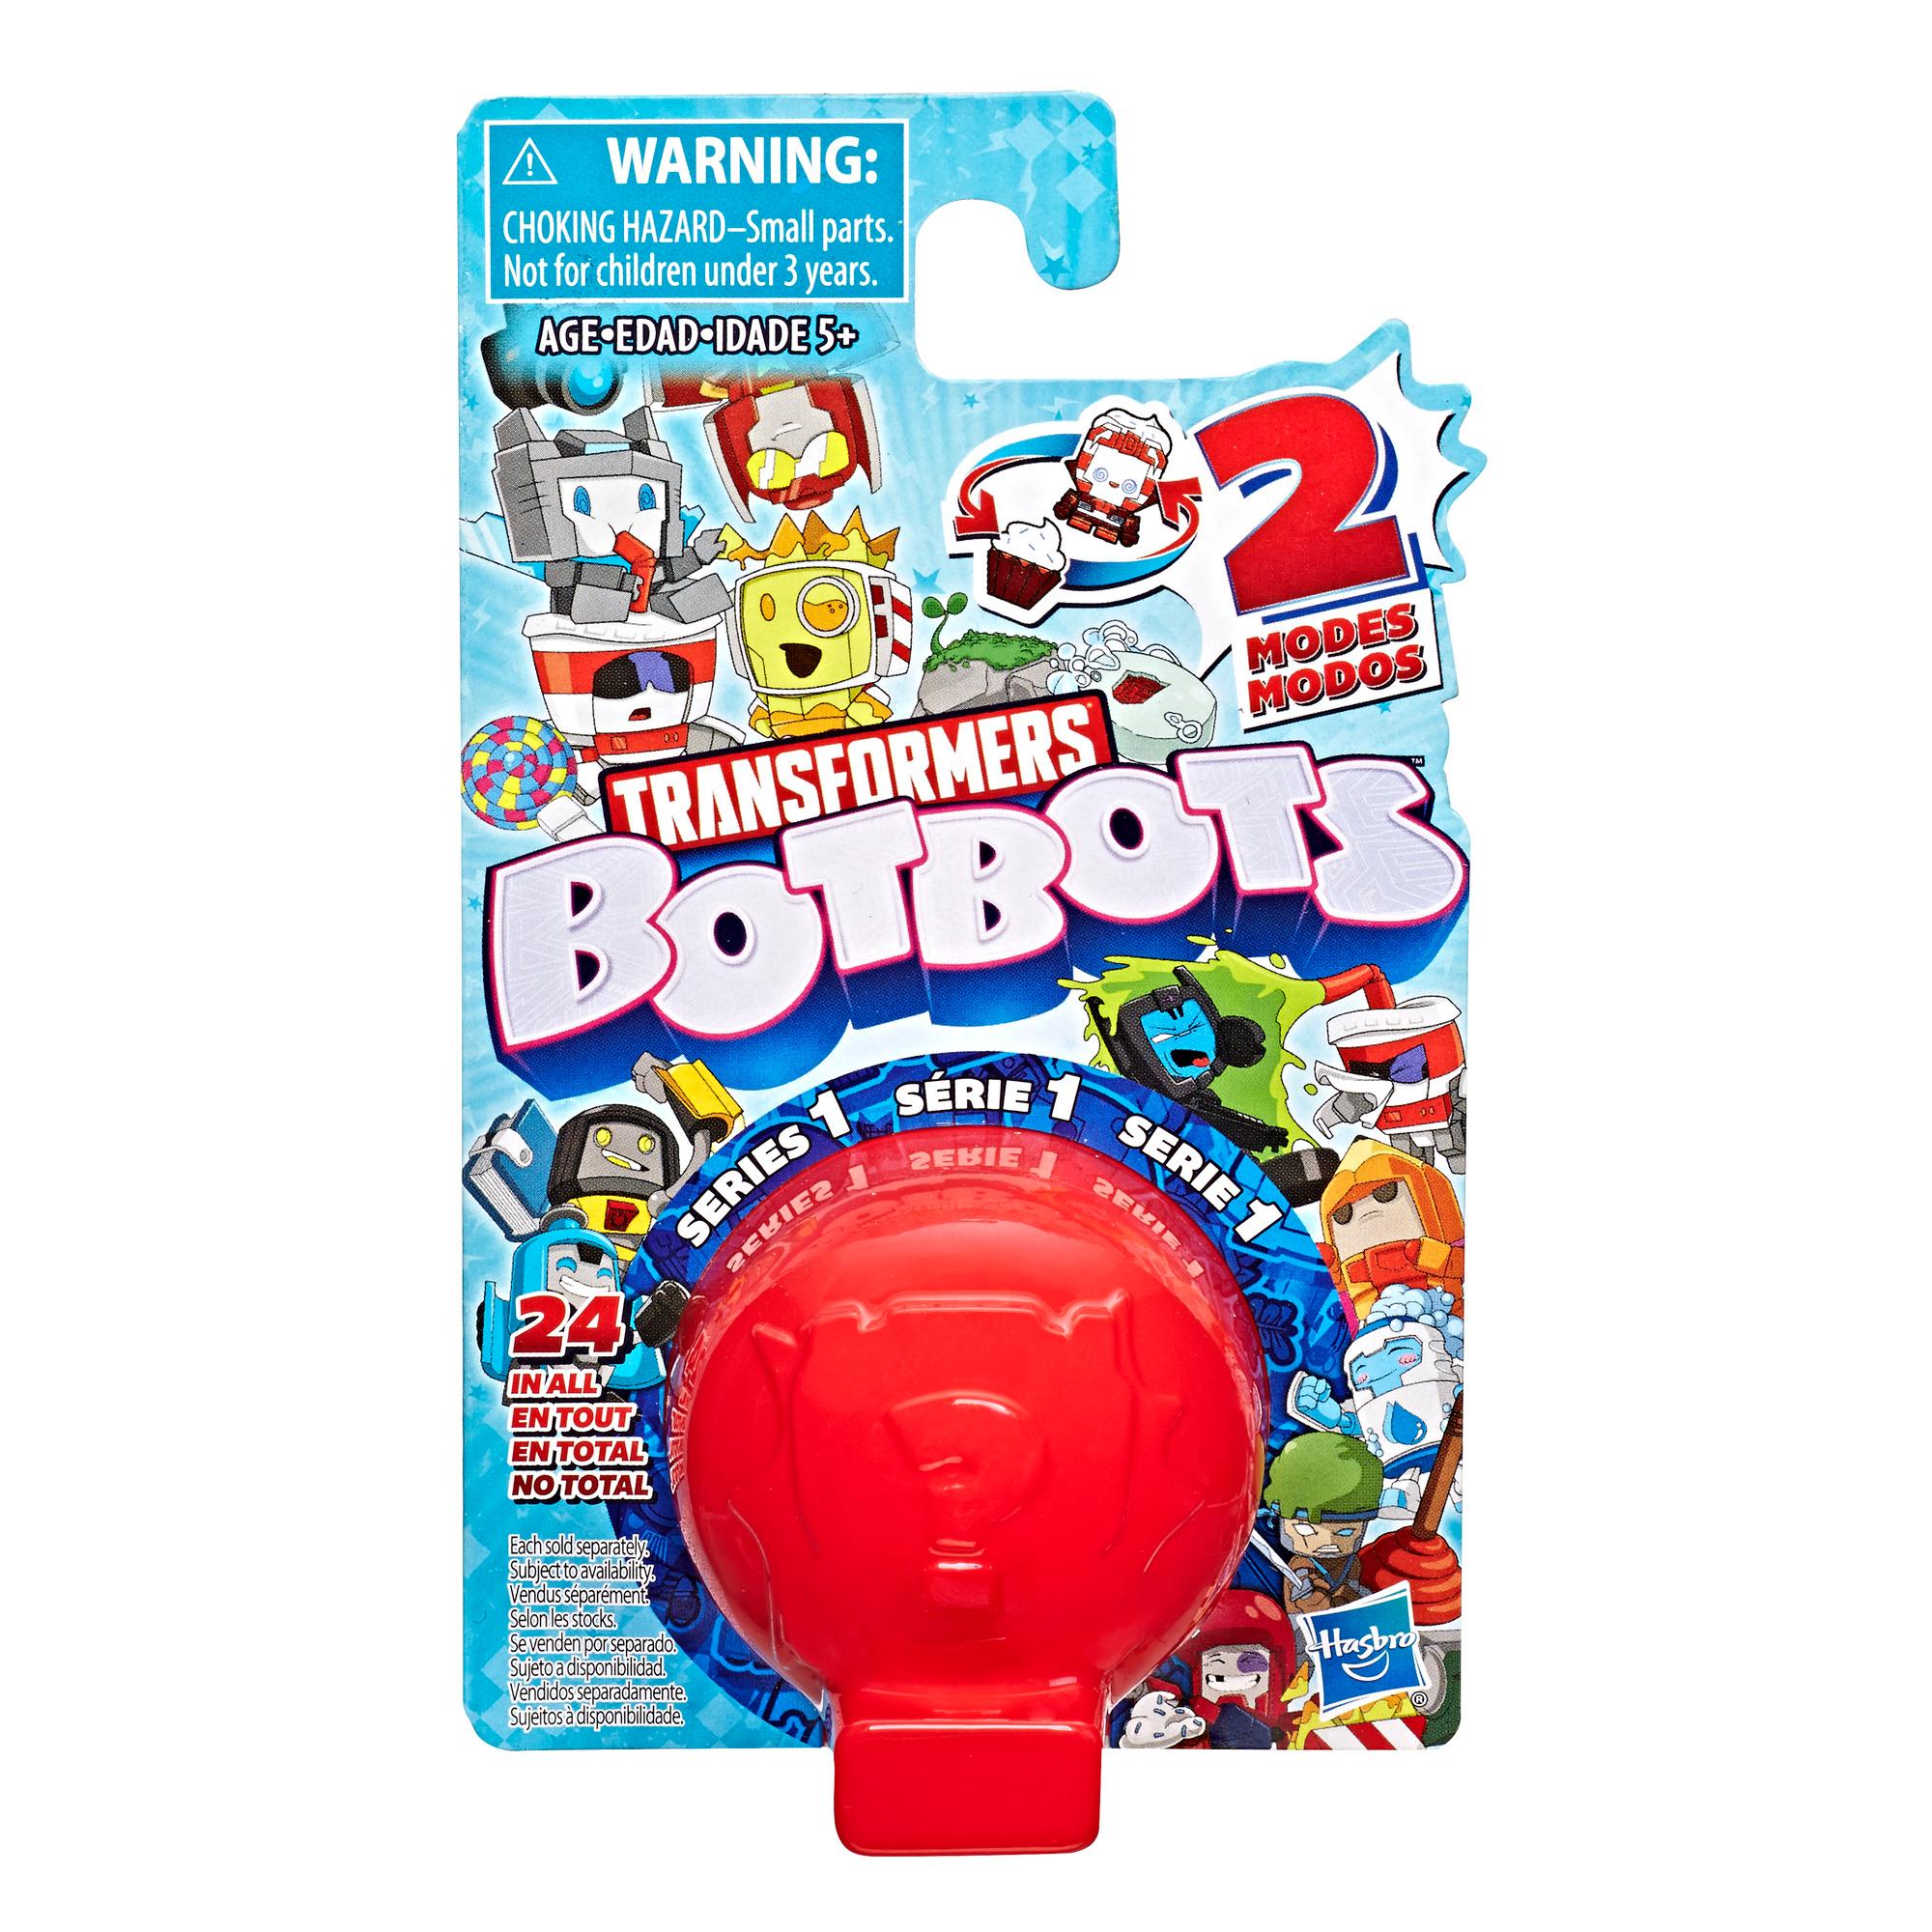 Transformers BotBots Series 1 Collectible Blind Bag Mystery Figure --  Surprise 2-In-1 Toy!